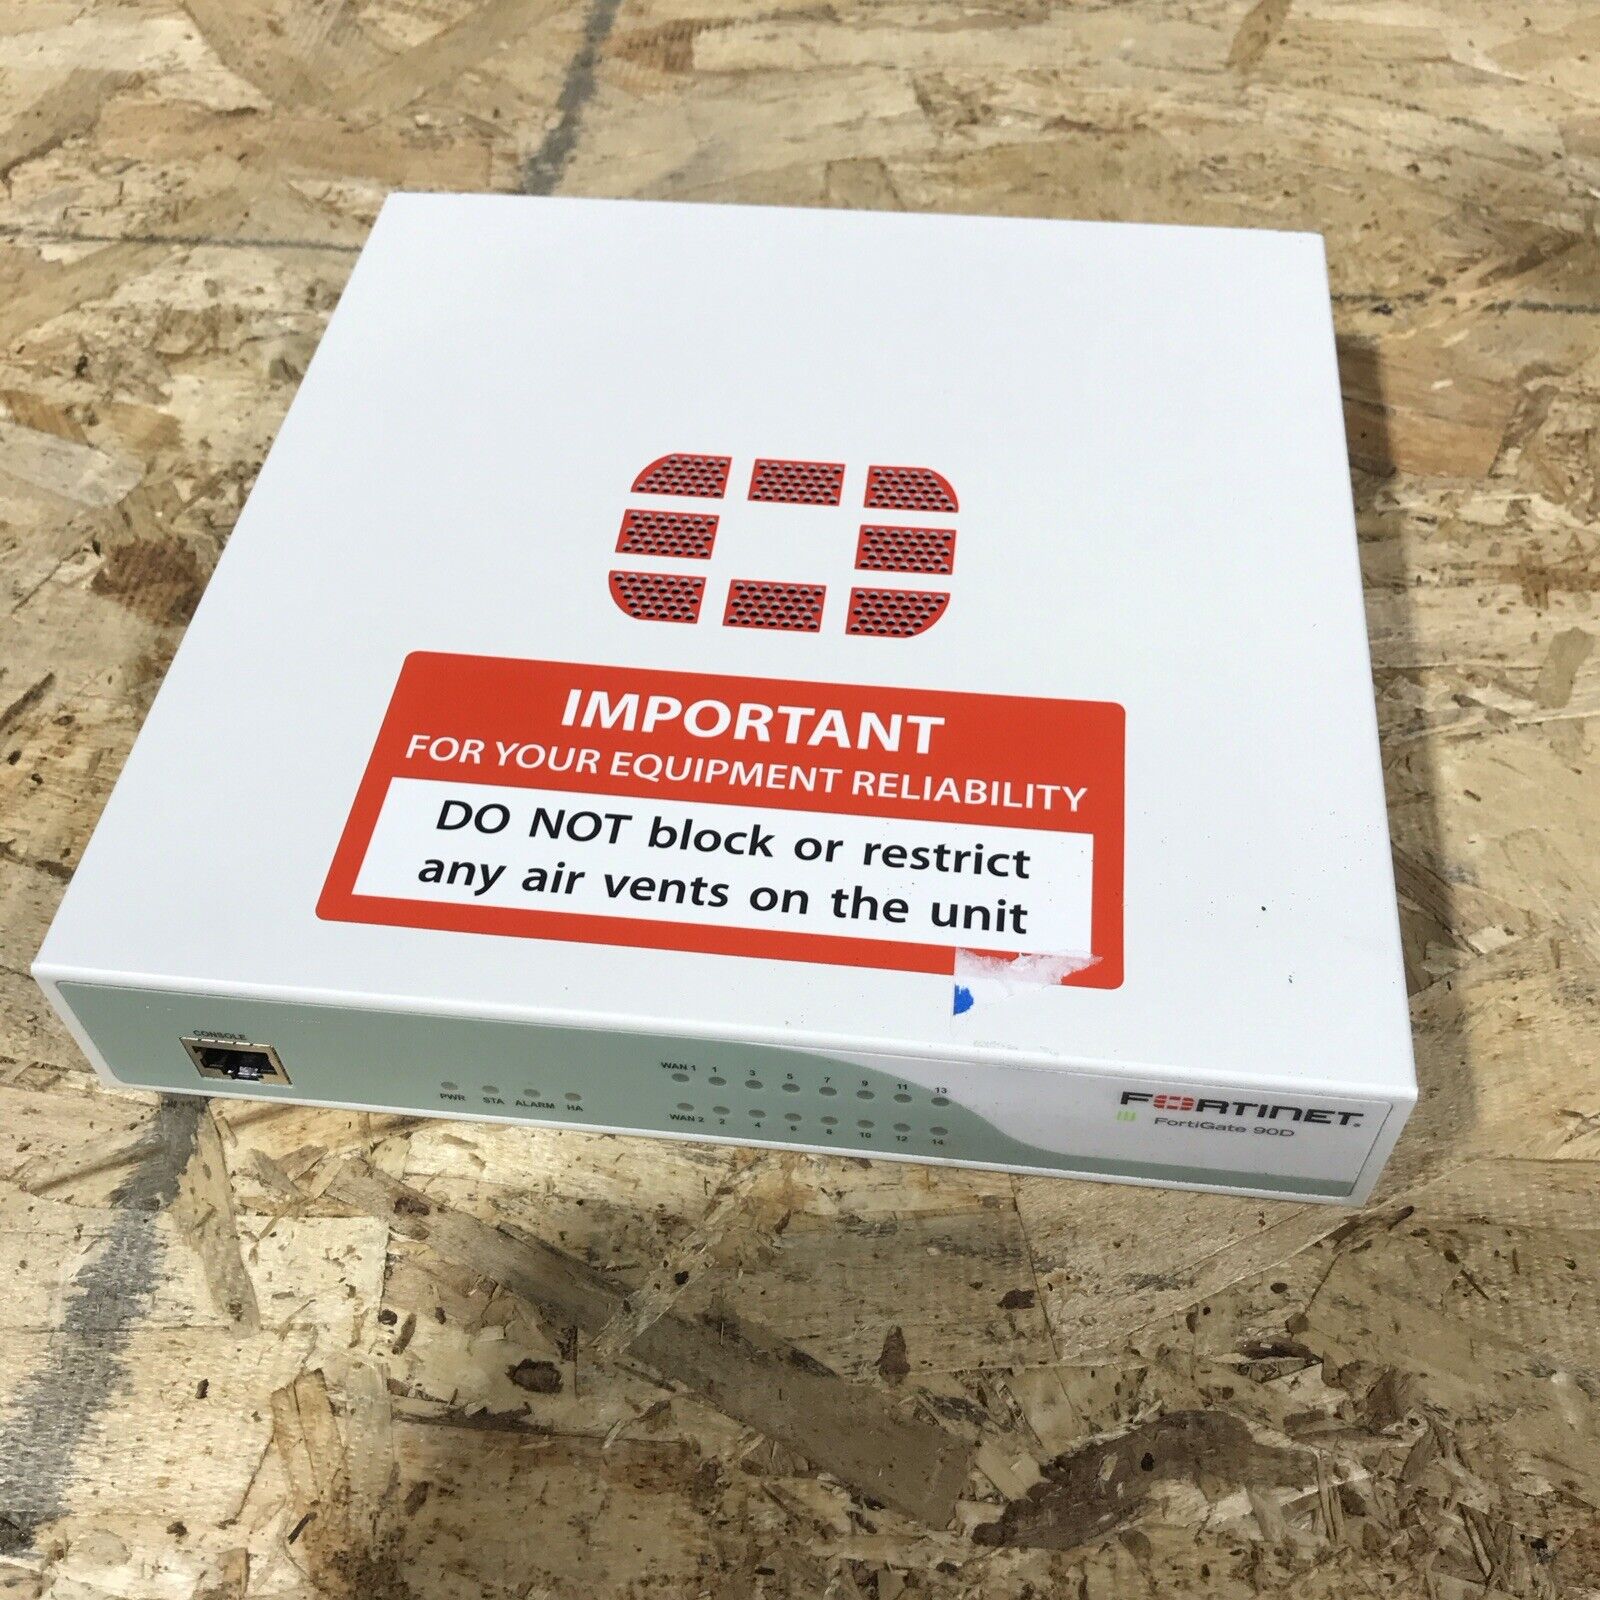 FORTINET FORTIGATE 90D FG-90D FIREWALL NETWORK SECURITY APPLIANCE NO POWER SPPLY